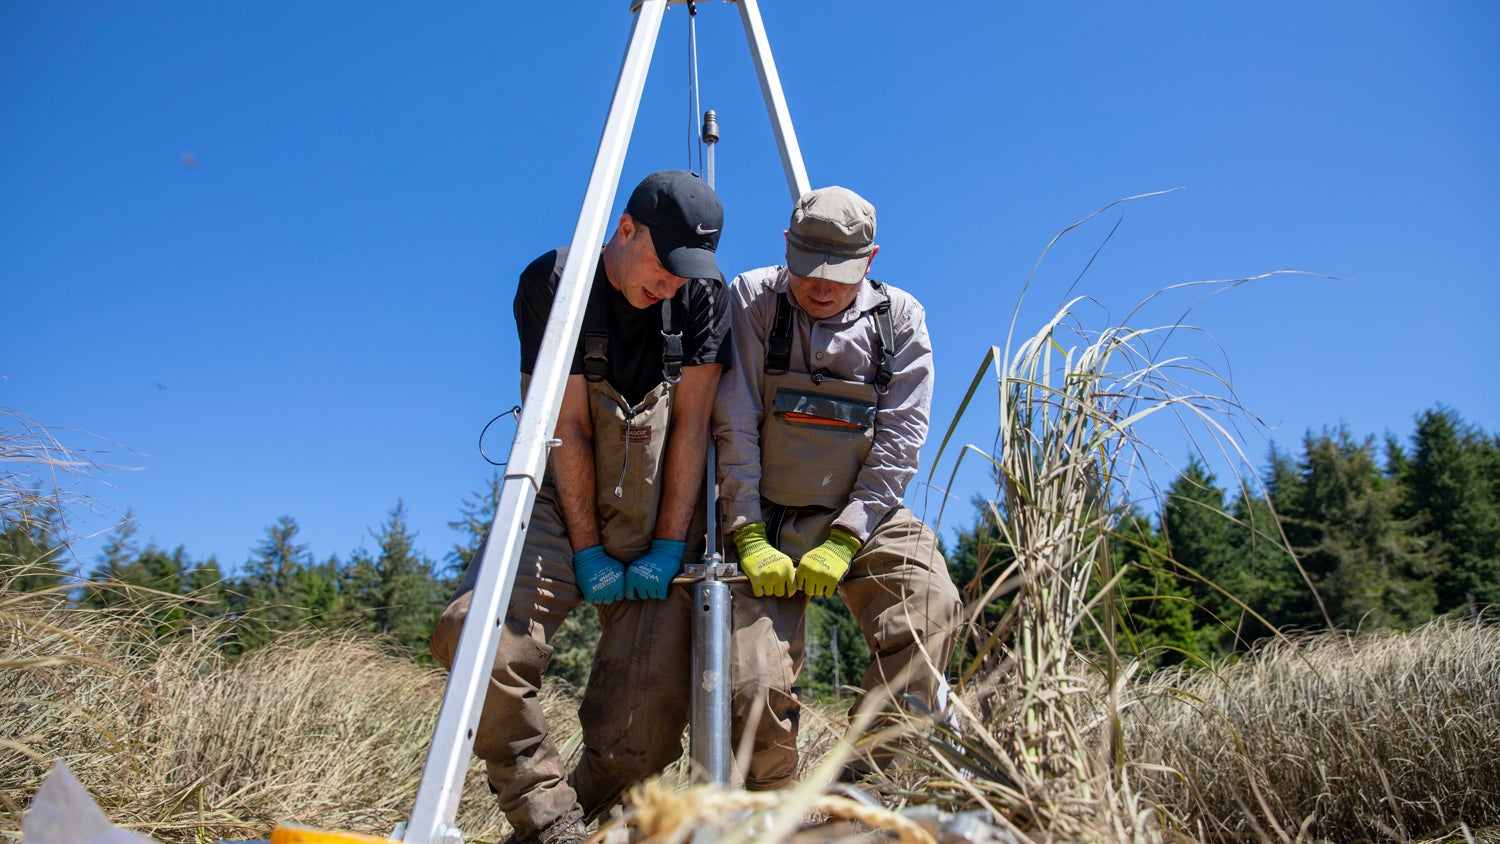 Two researchers in the field operate equipment in the South Slough near Coos Bay, Oregon.